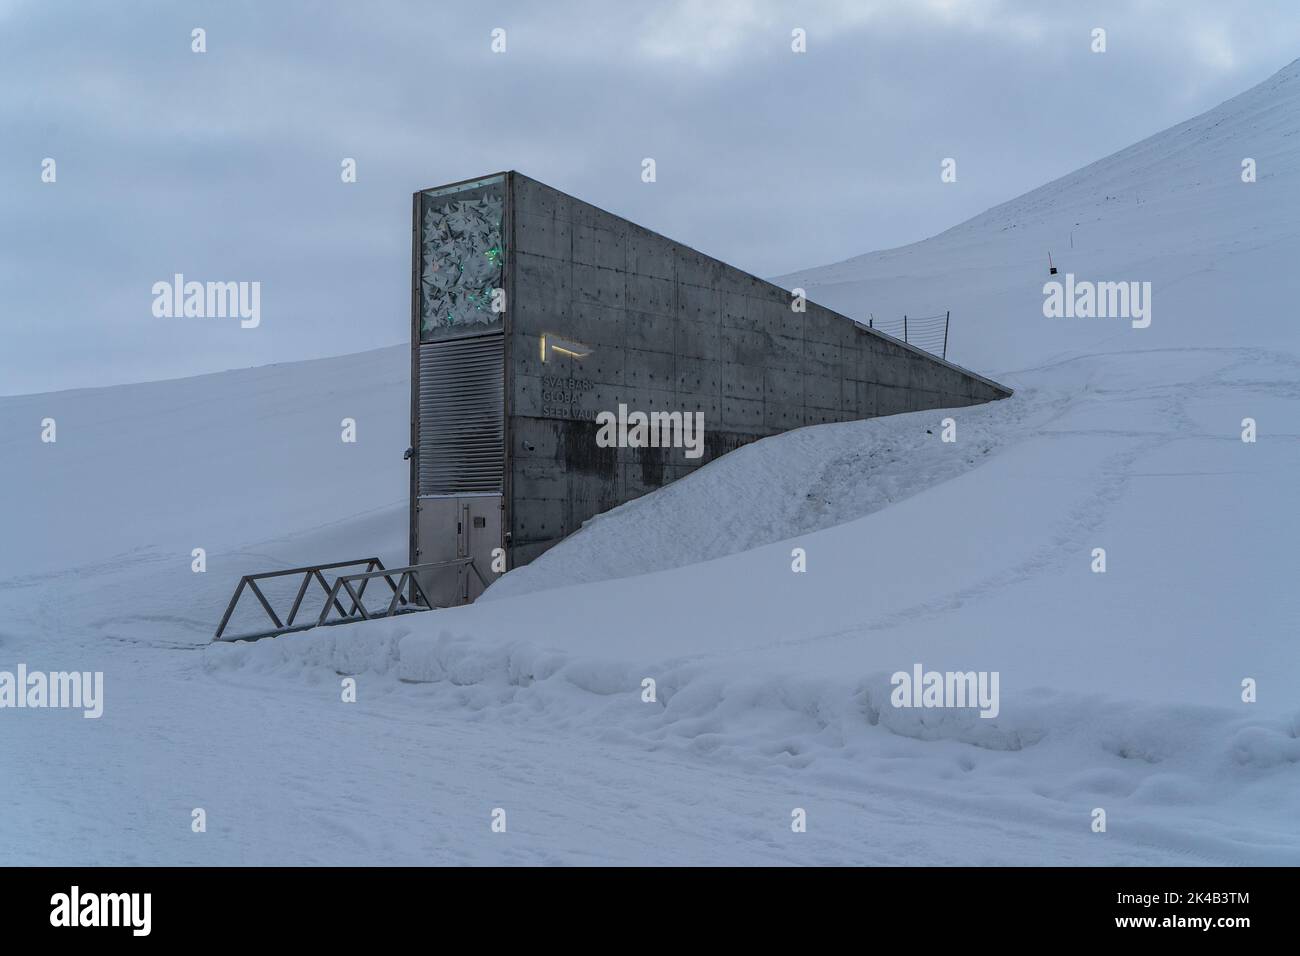 Svalbard Global Seed Vault on cold snowy winter day outside Longyearbyen Stock Photo